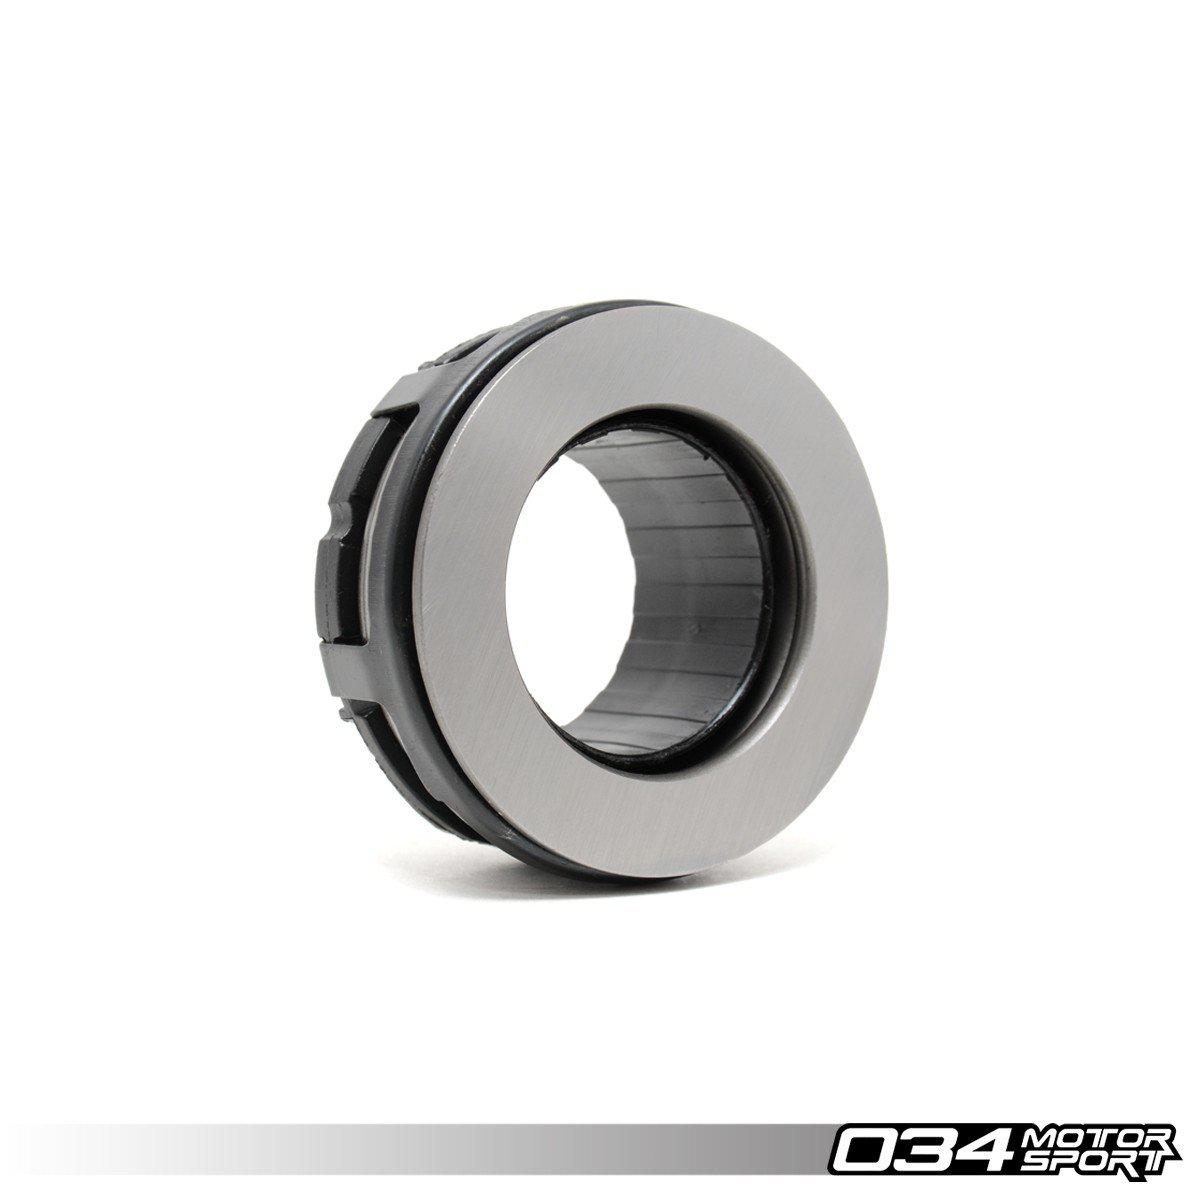 Clutch Throw Out Bearing, Metal, Audi 01a/01e-A Little Tuning Co